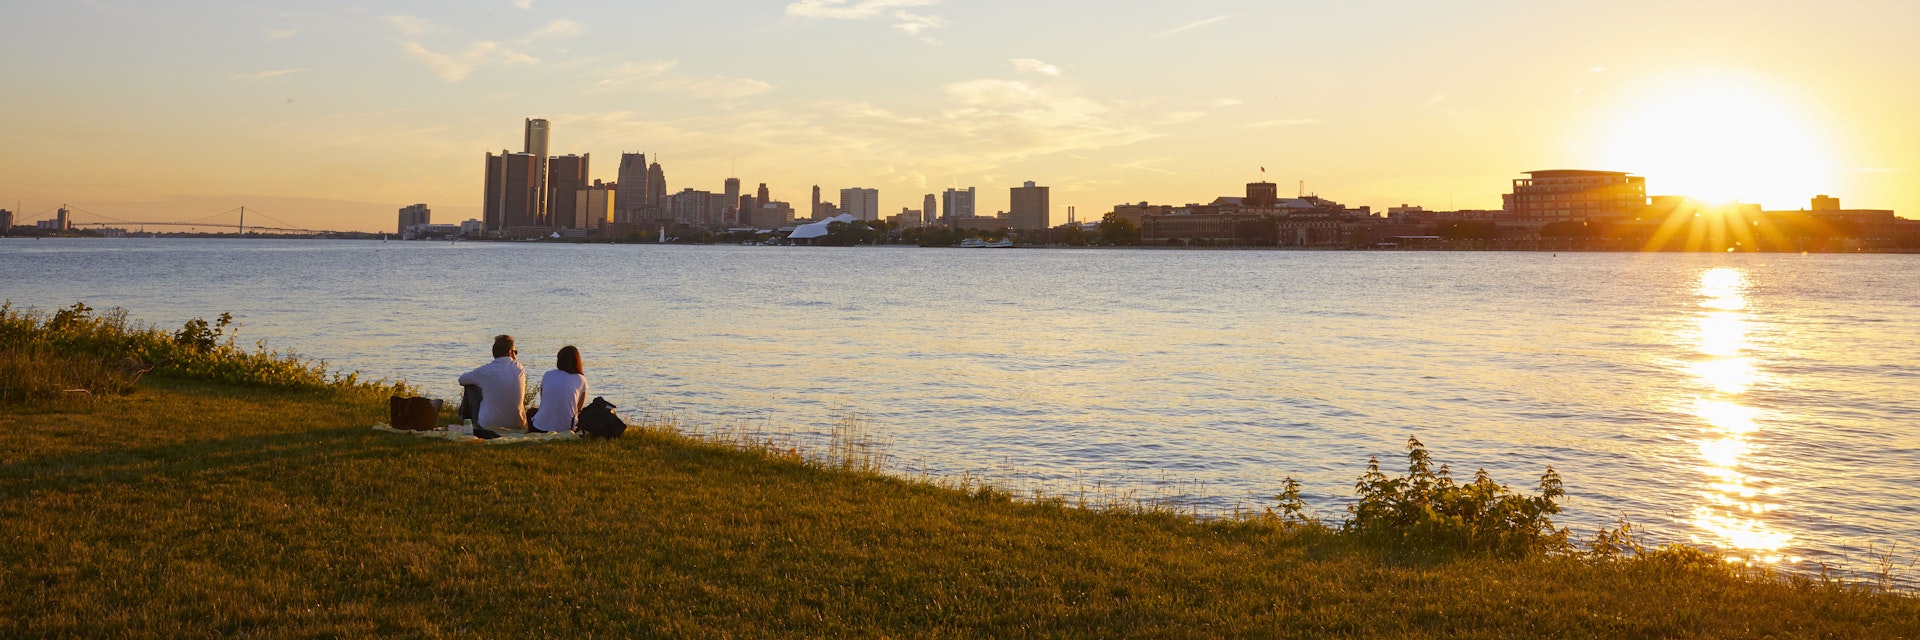 Sunset over Detroit as seen from Belle Isle in the Detroit River.